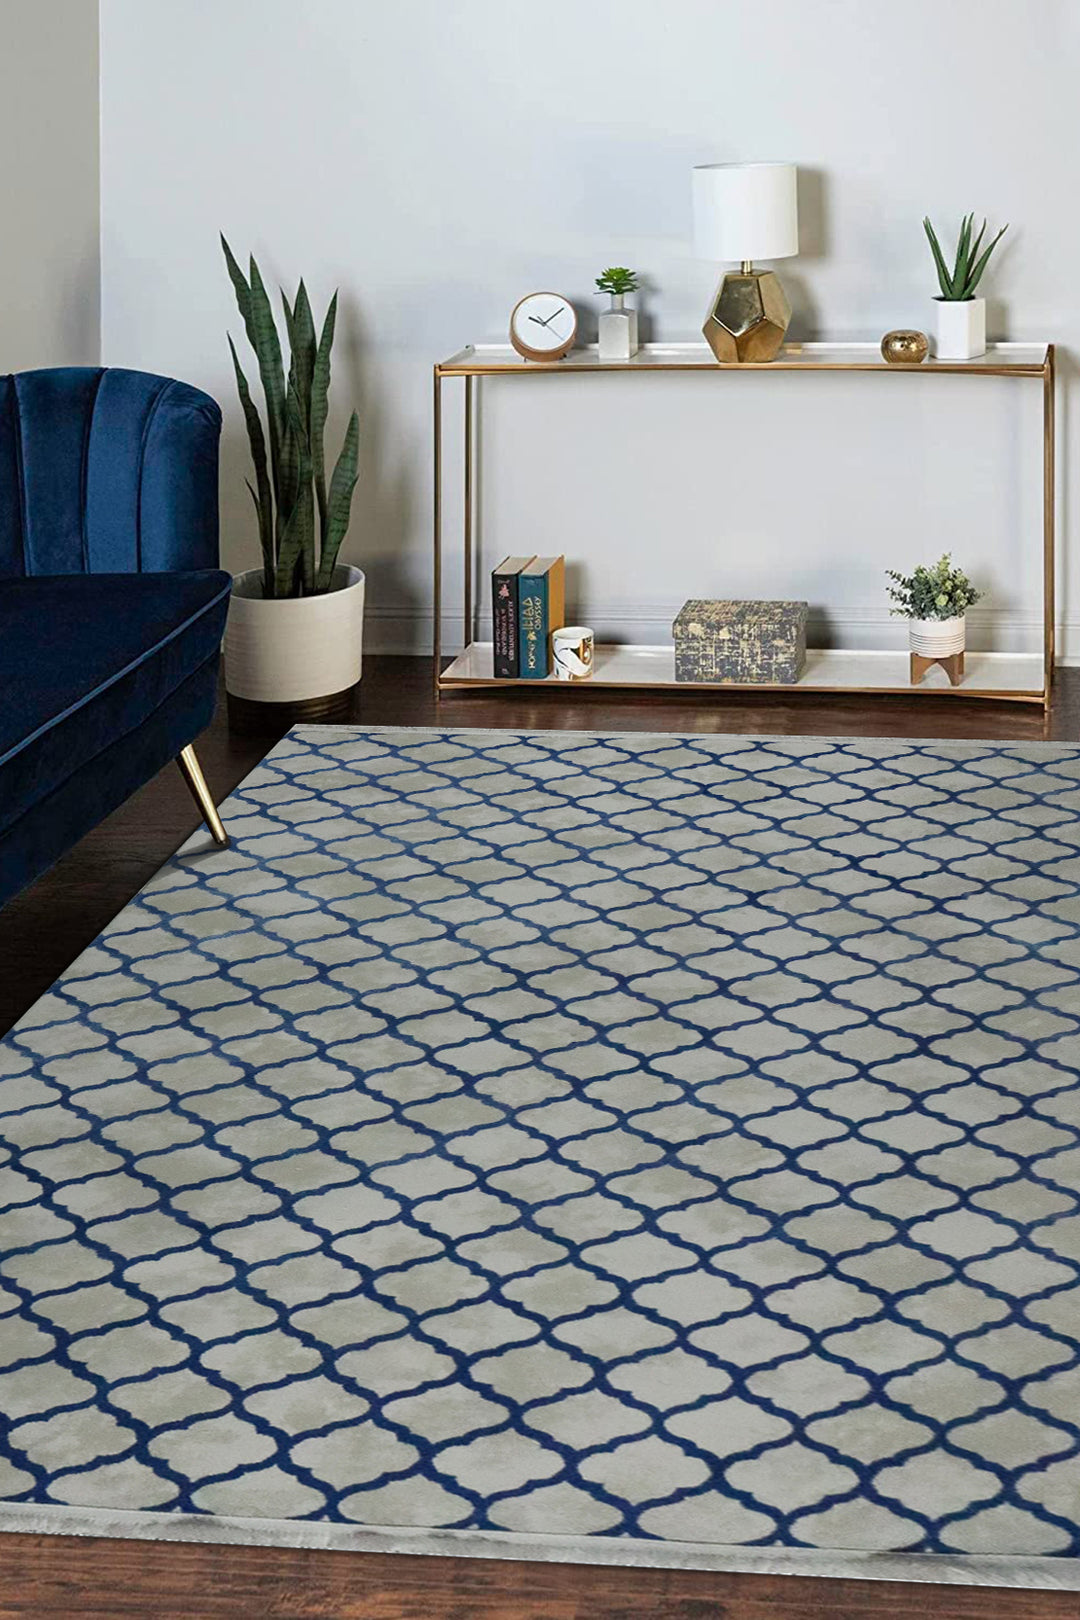 Turkish Modern Festival 1 Rug - 5.2 x 7.5 FT - Gray  and Blue - Superior Comfort, Modern Style Accent Rugs